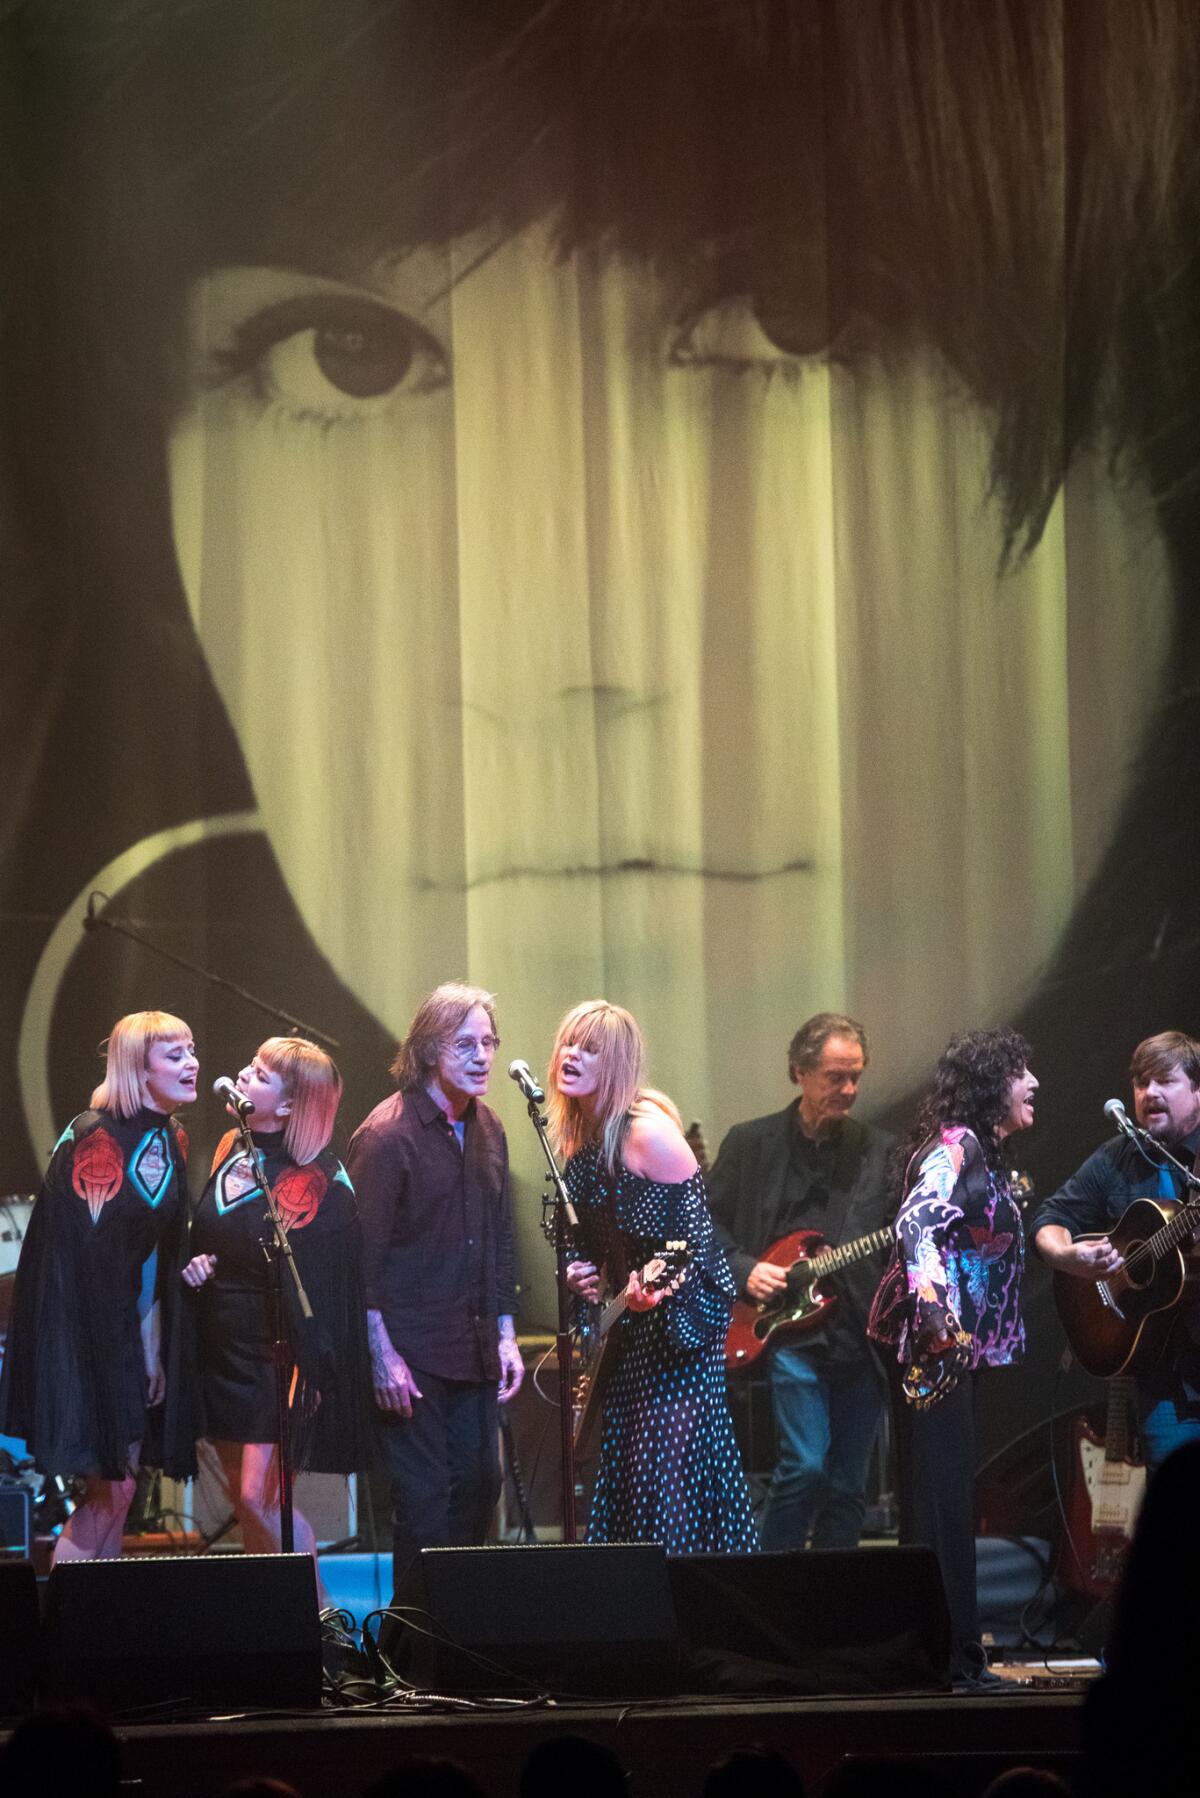 Jackson Browne leads the all-star finale of Sunday's musical salute to singer Linda Ronstadt